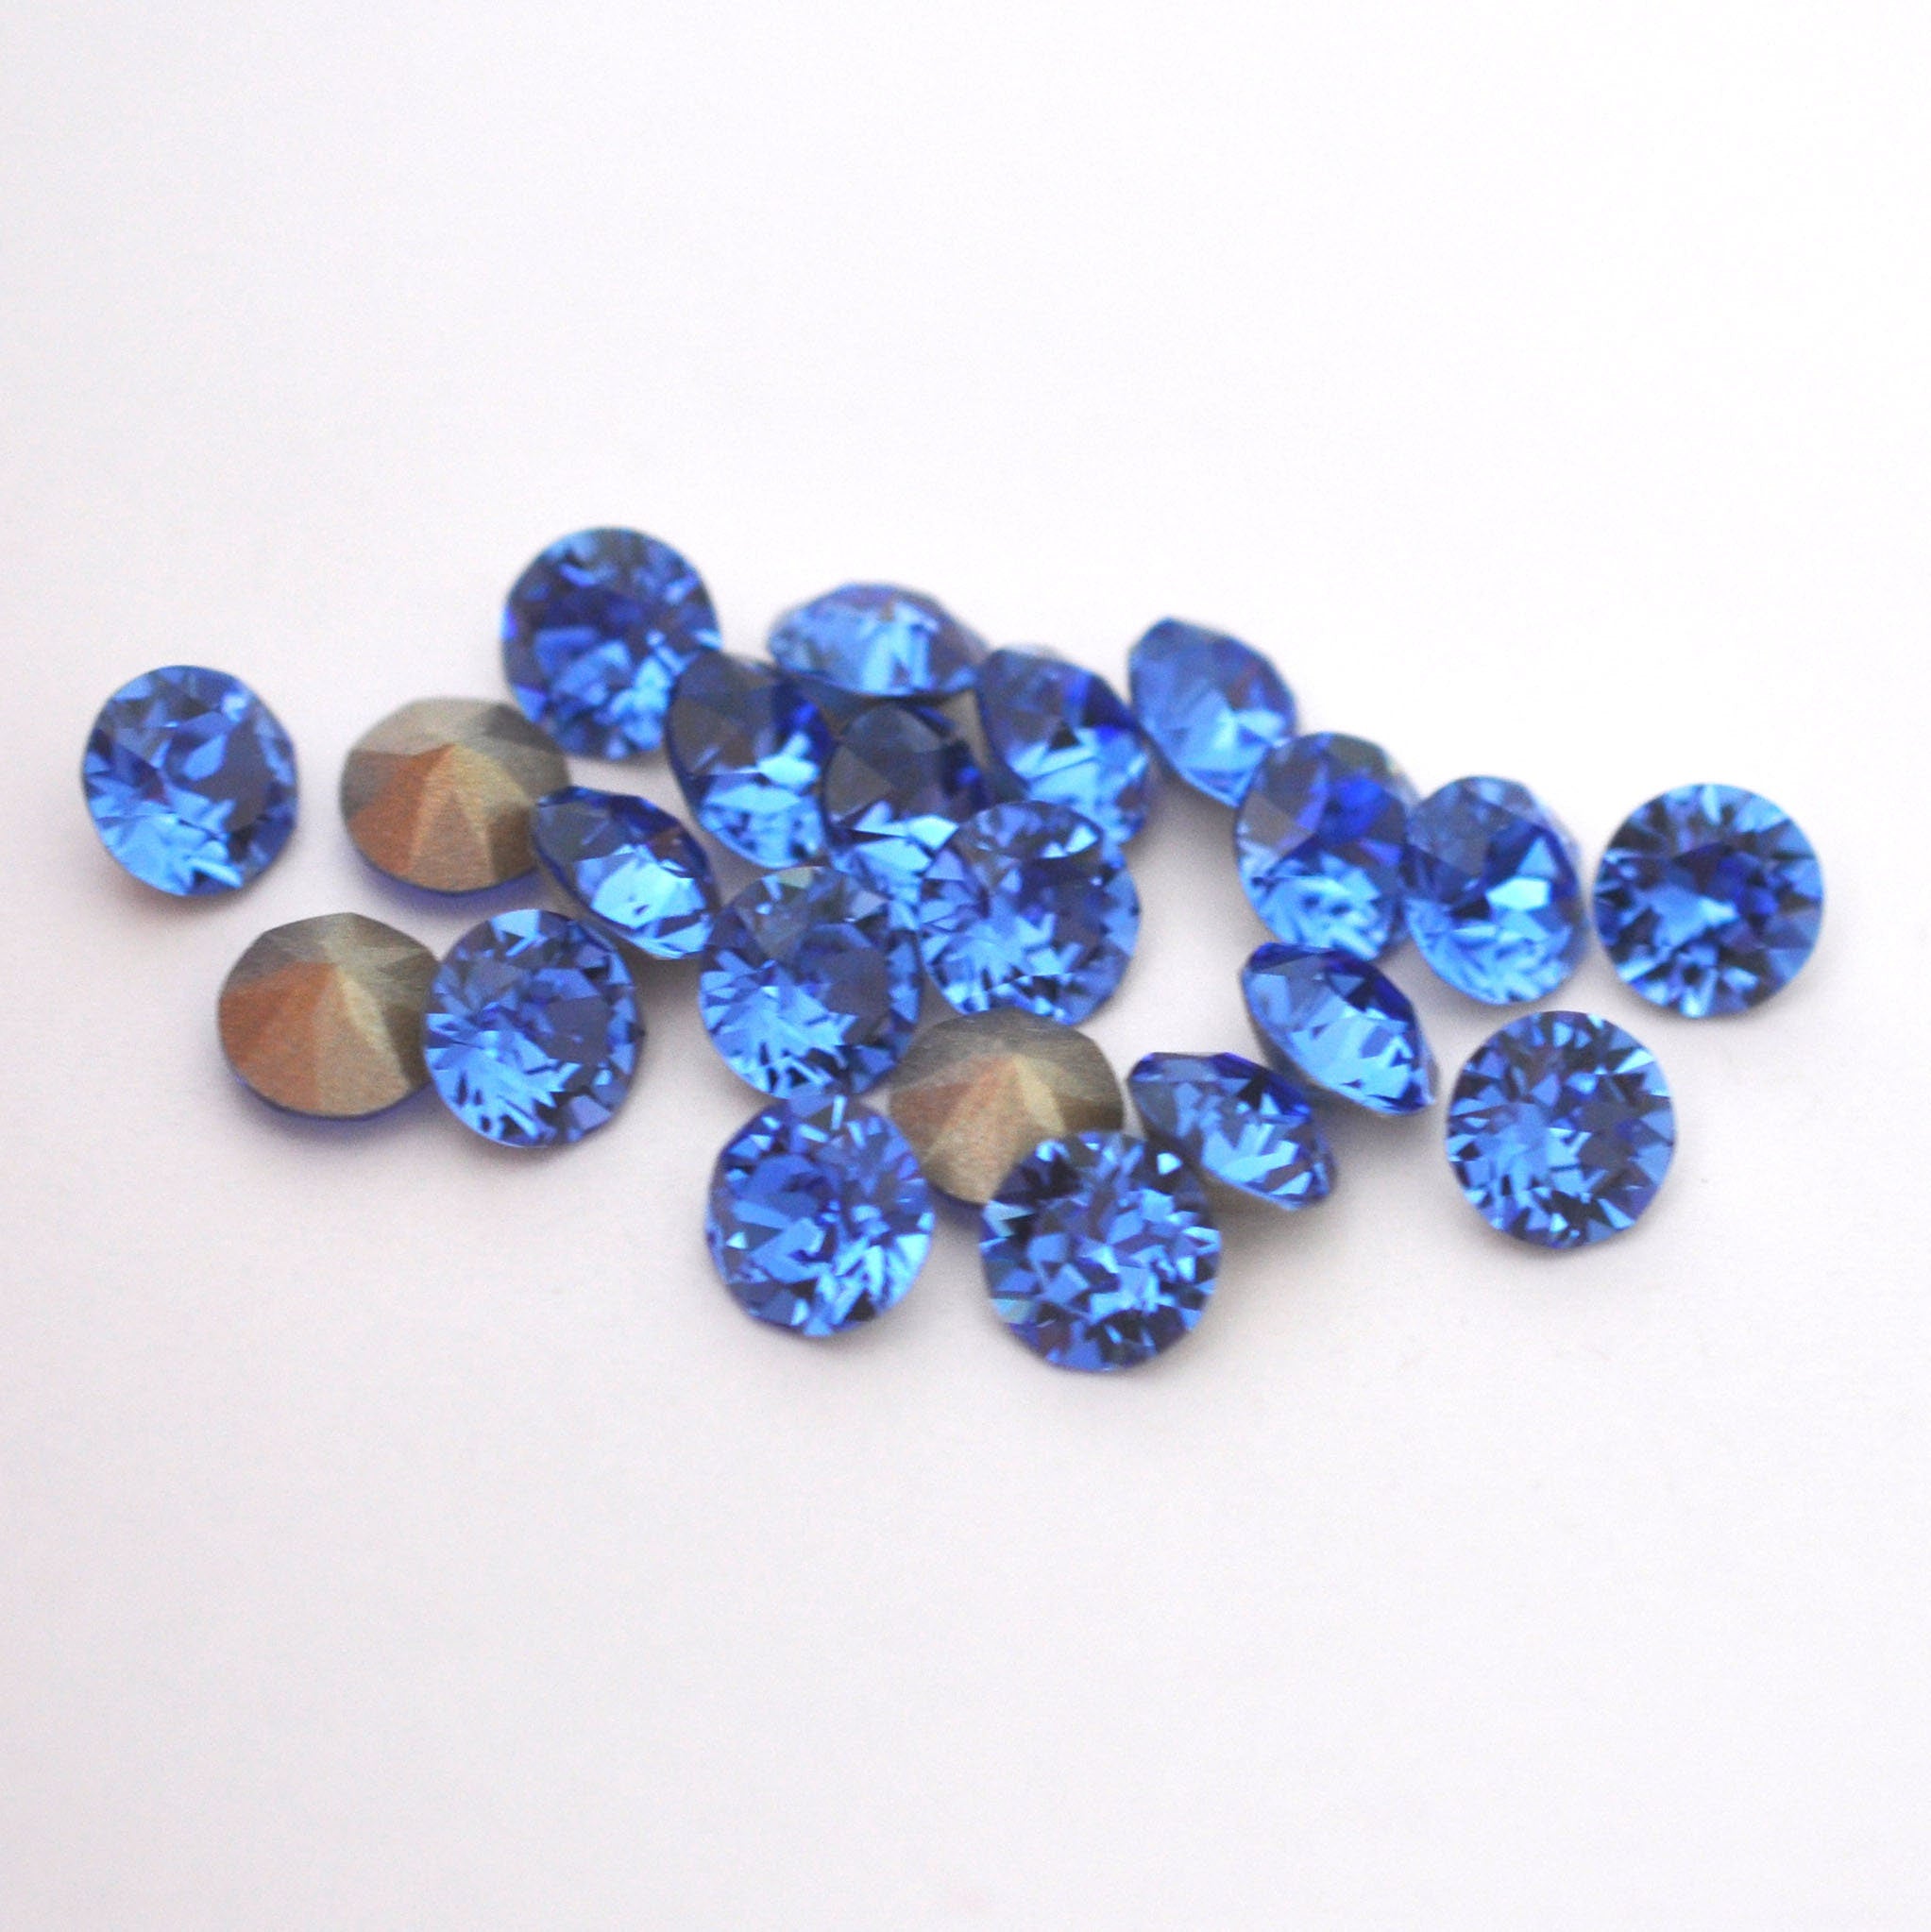 Sapphire 1088 Pointed Back Chaton Barton Crystal 29ss, 6mm